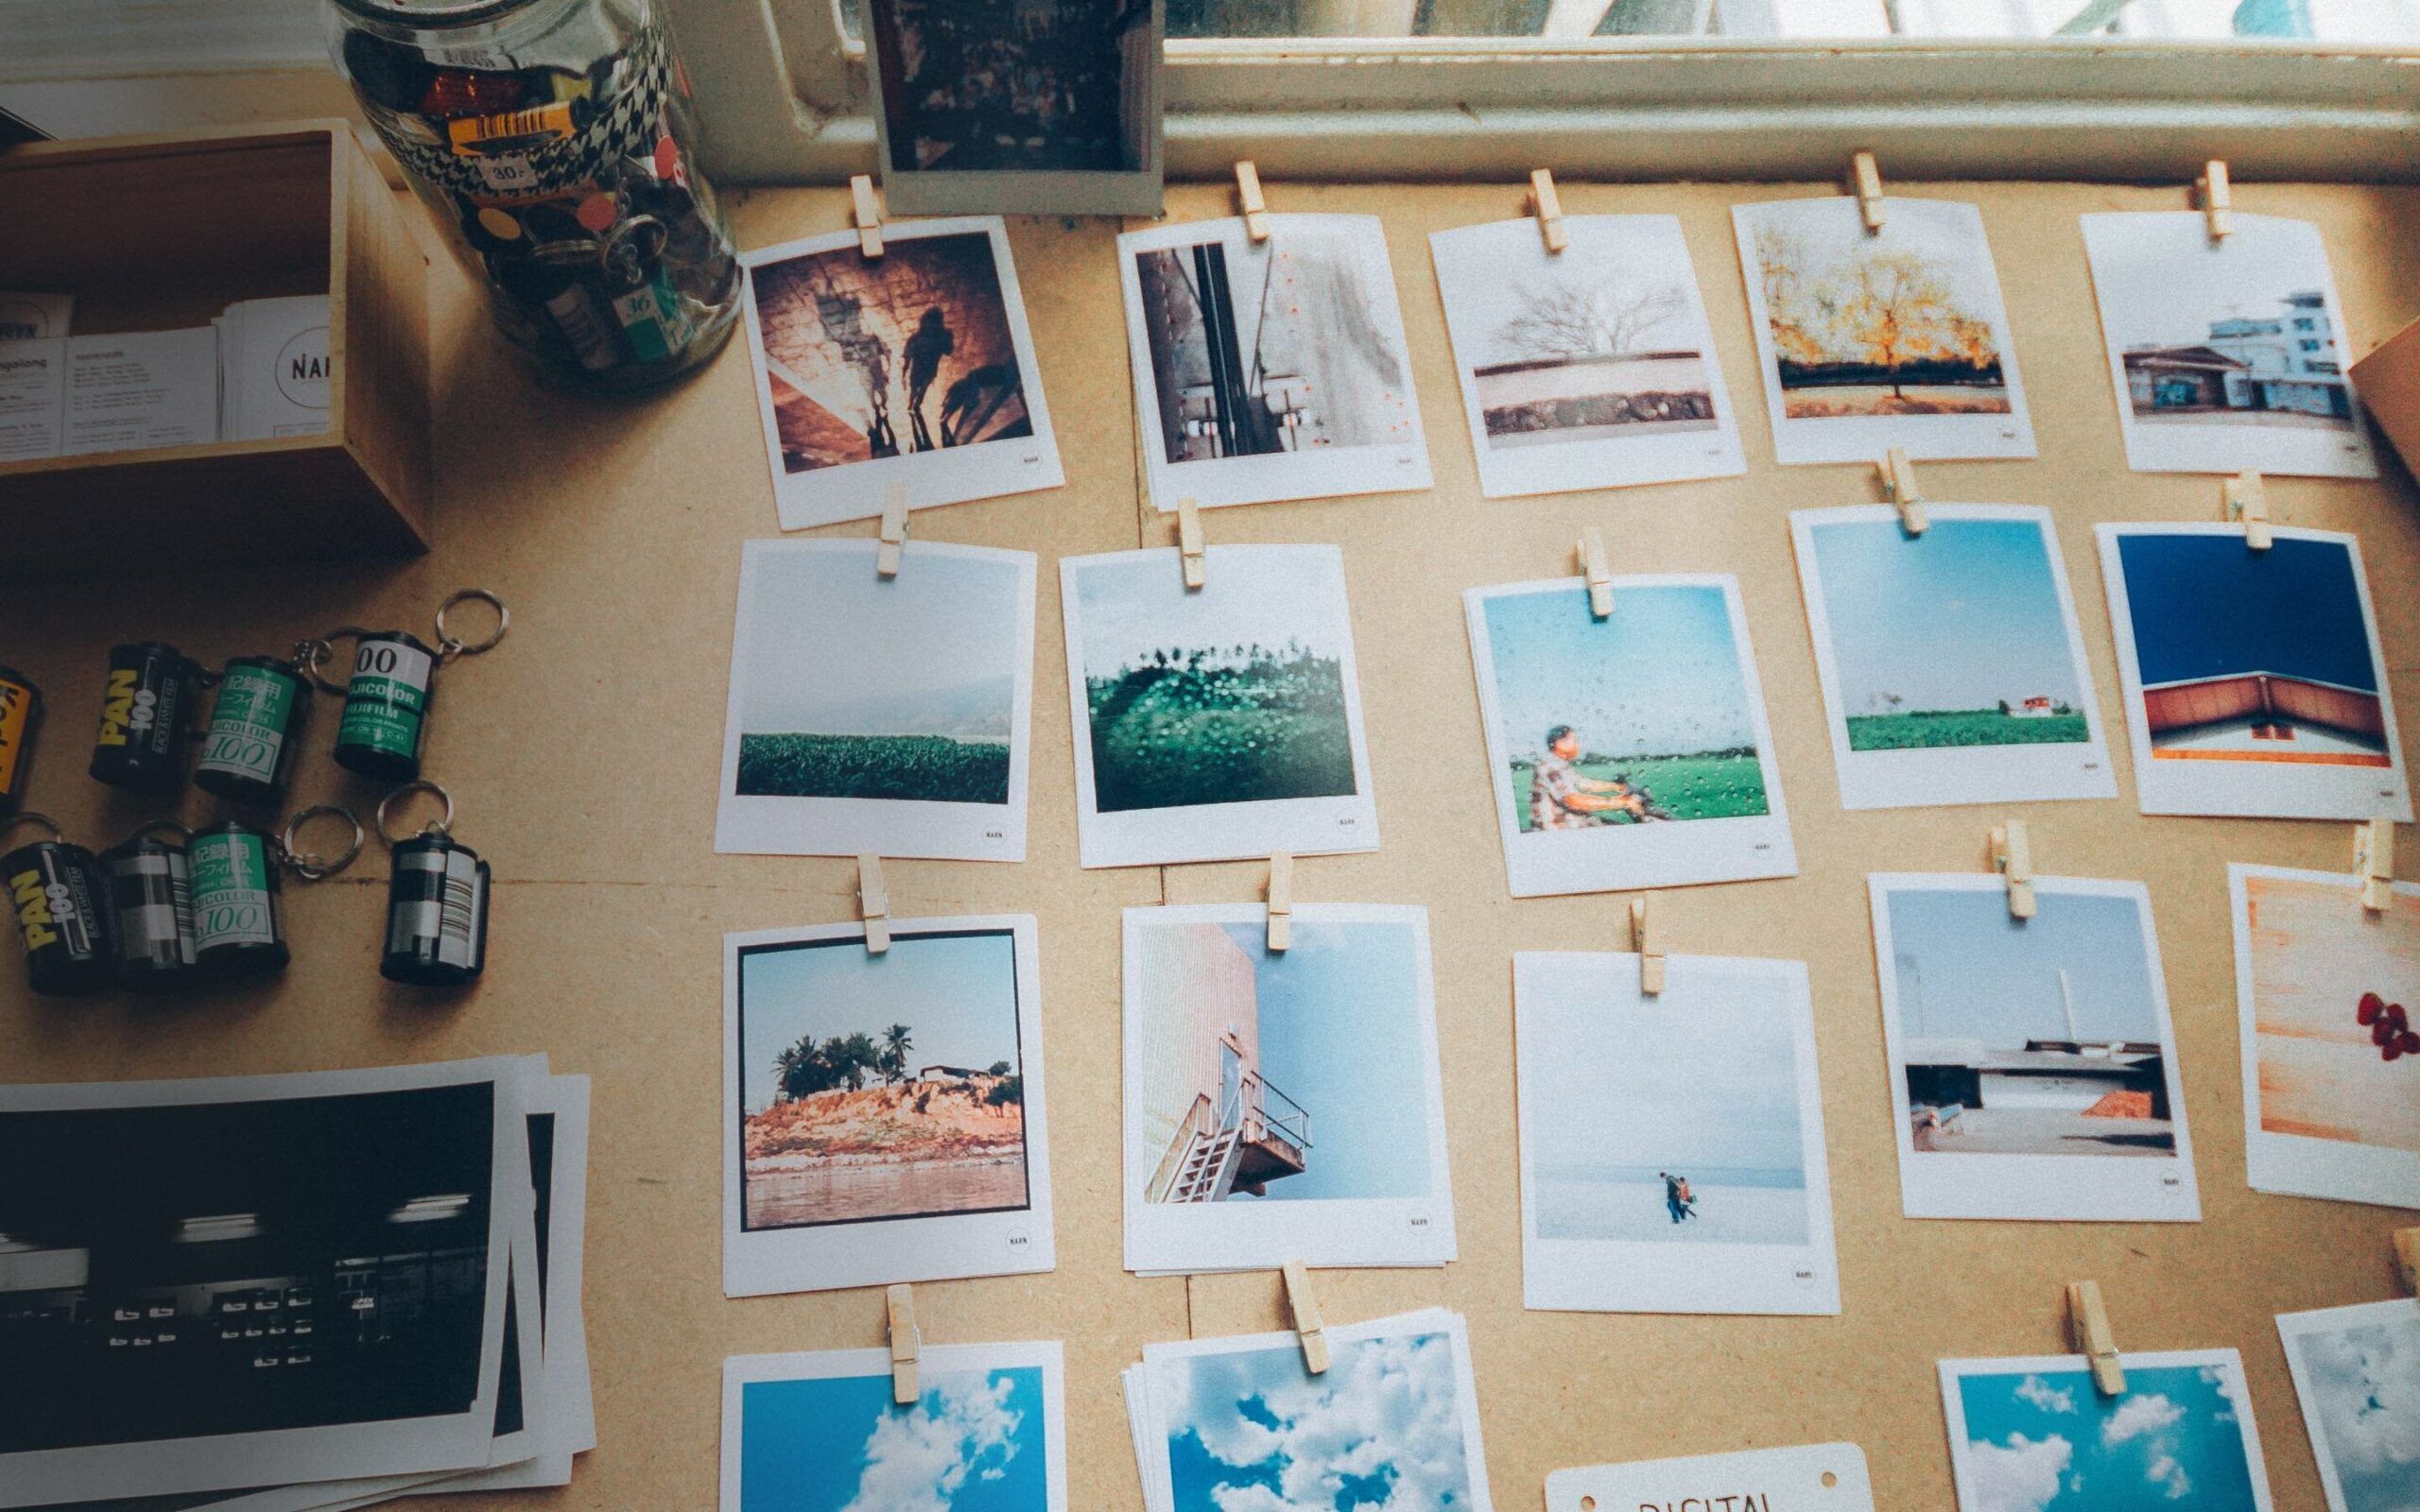 A selection of polaroids lie on a table